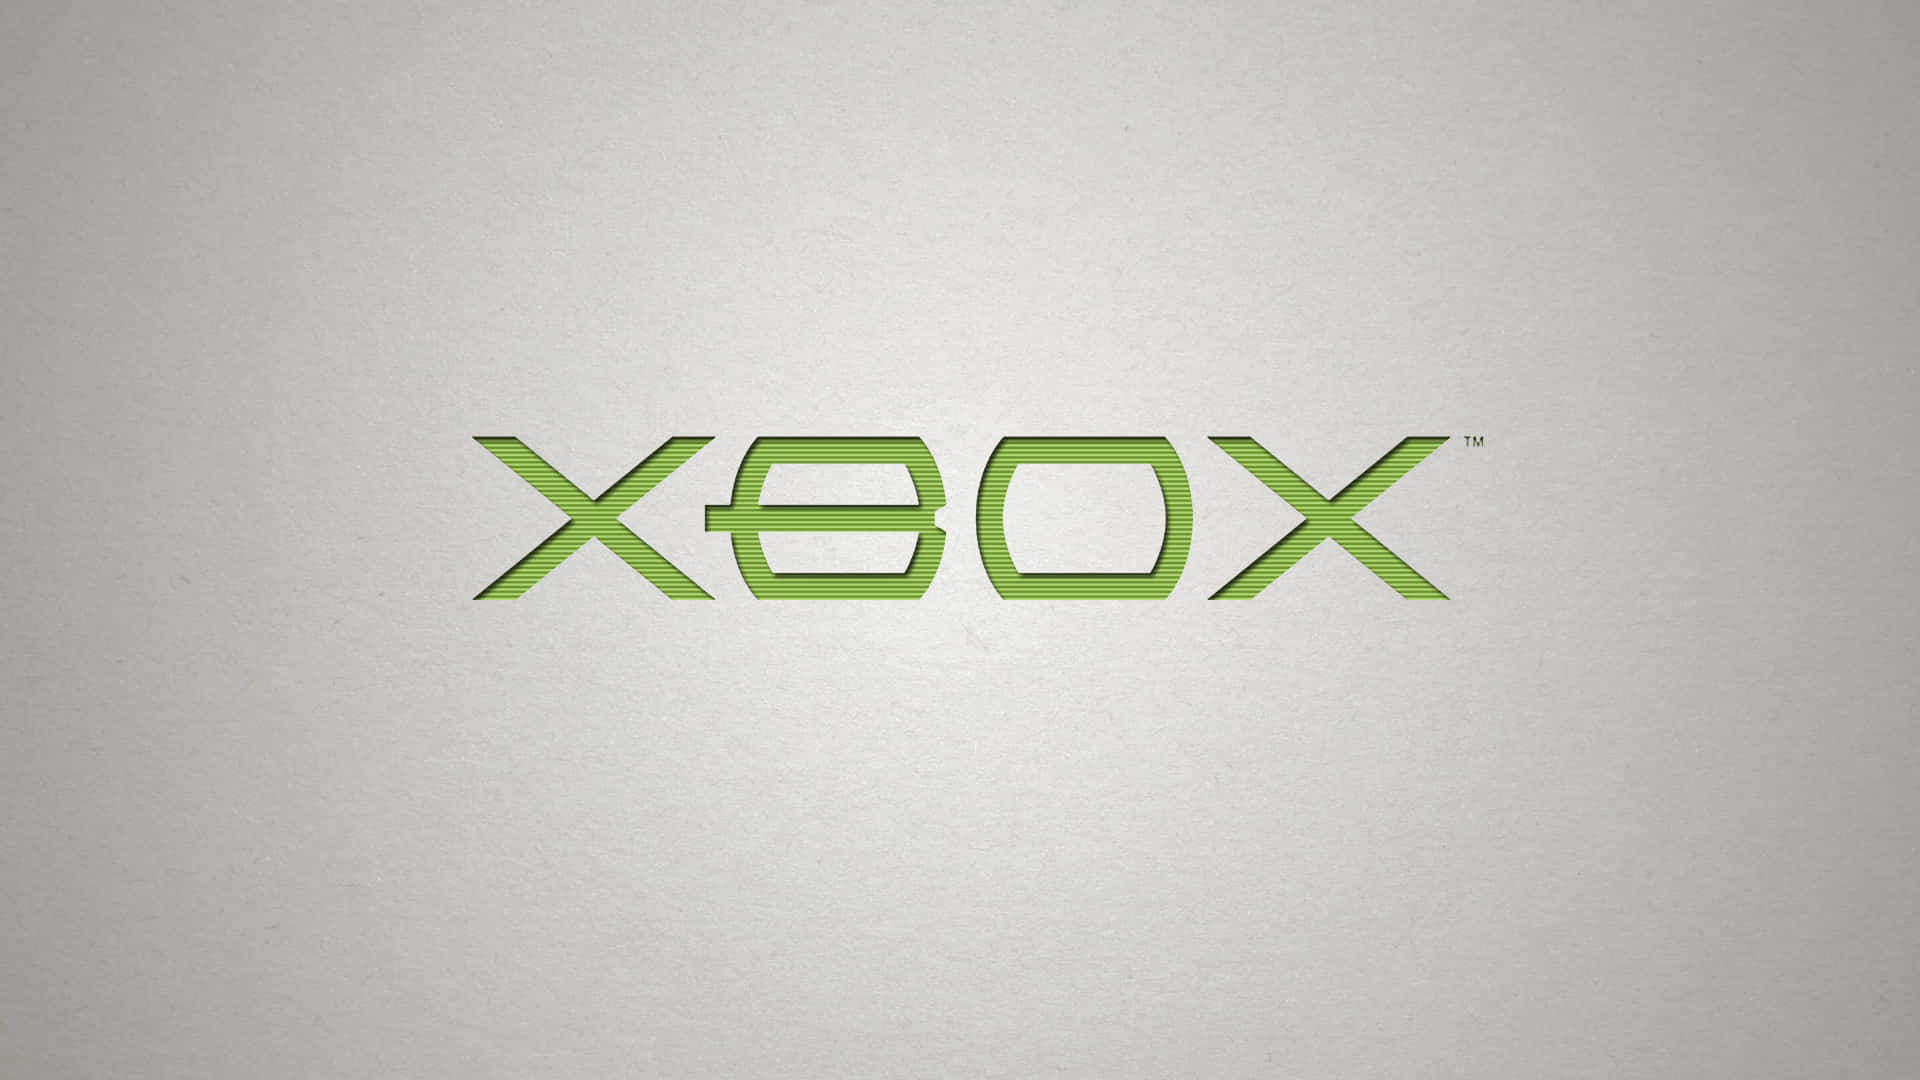 Get Ready to Play with the Coolest Xbox Wallpaper